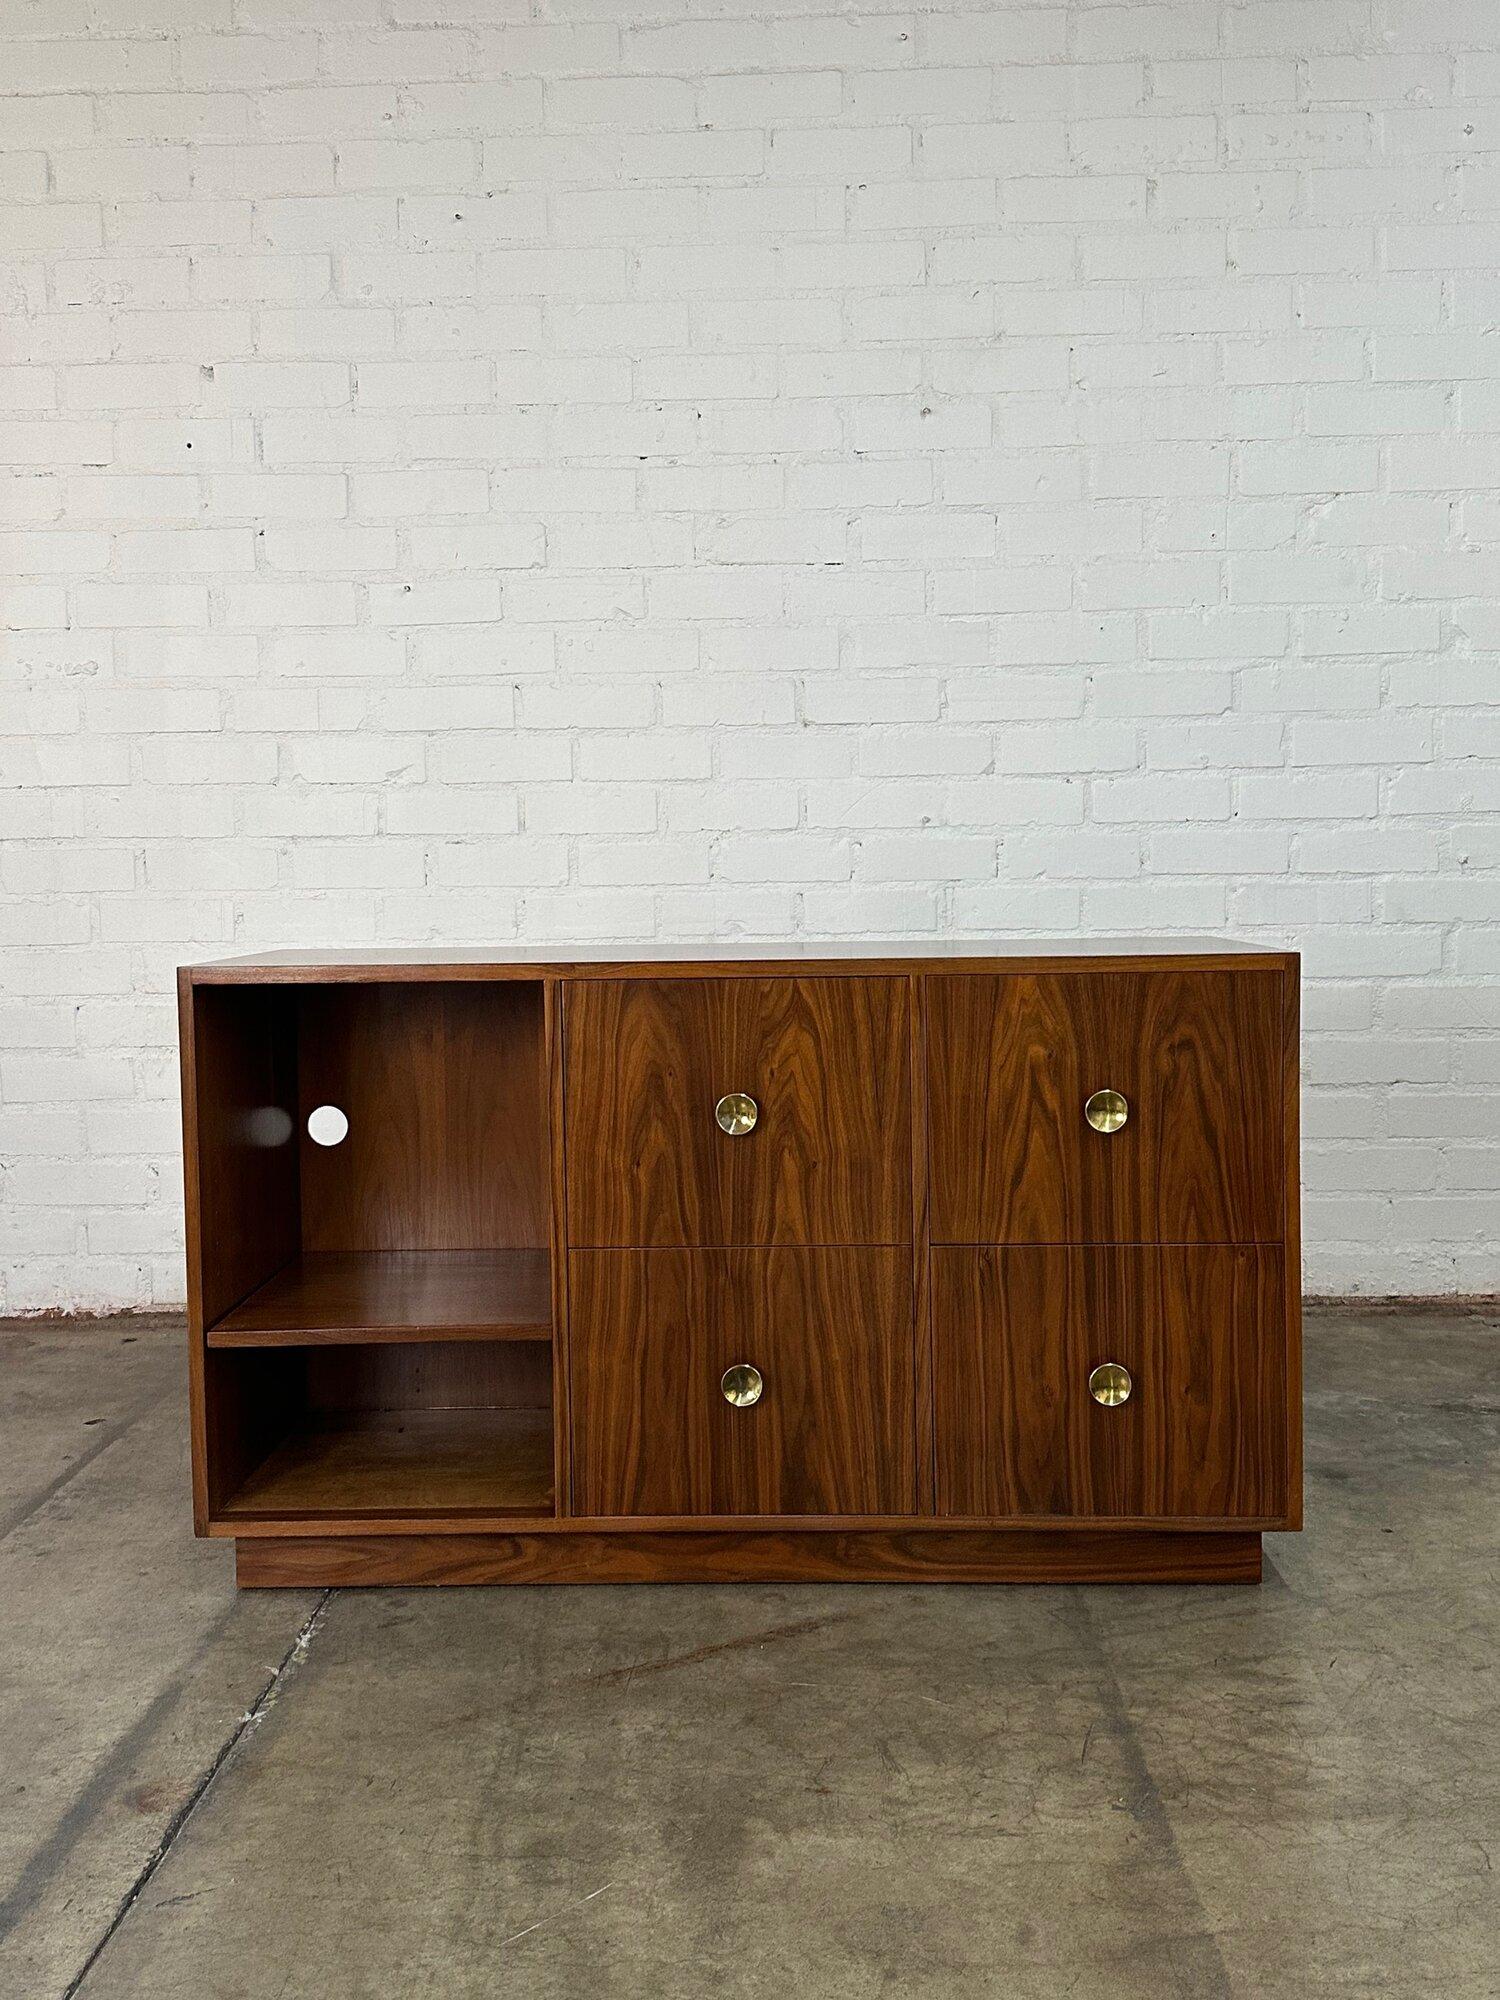 W52 D18 H30

Walnut dual use sideboard with open shelving and enclosed storage. Item has been fully restored and is structurally sound and sturdy. Item sits on a plinth base for great stability.